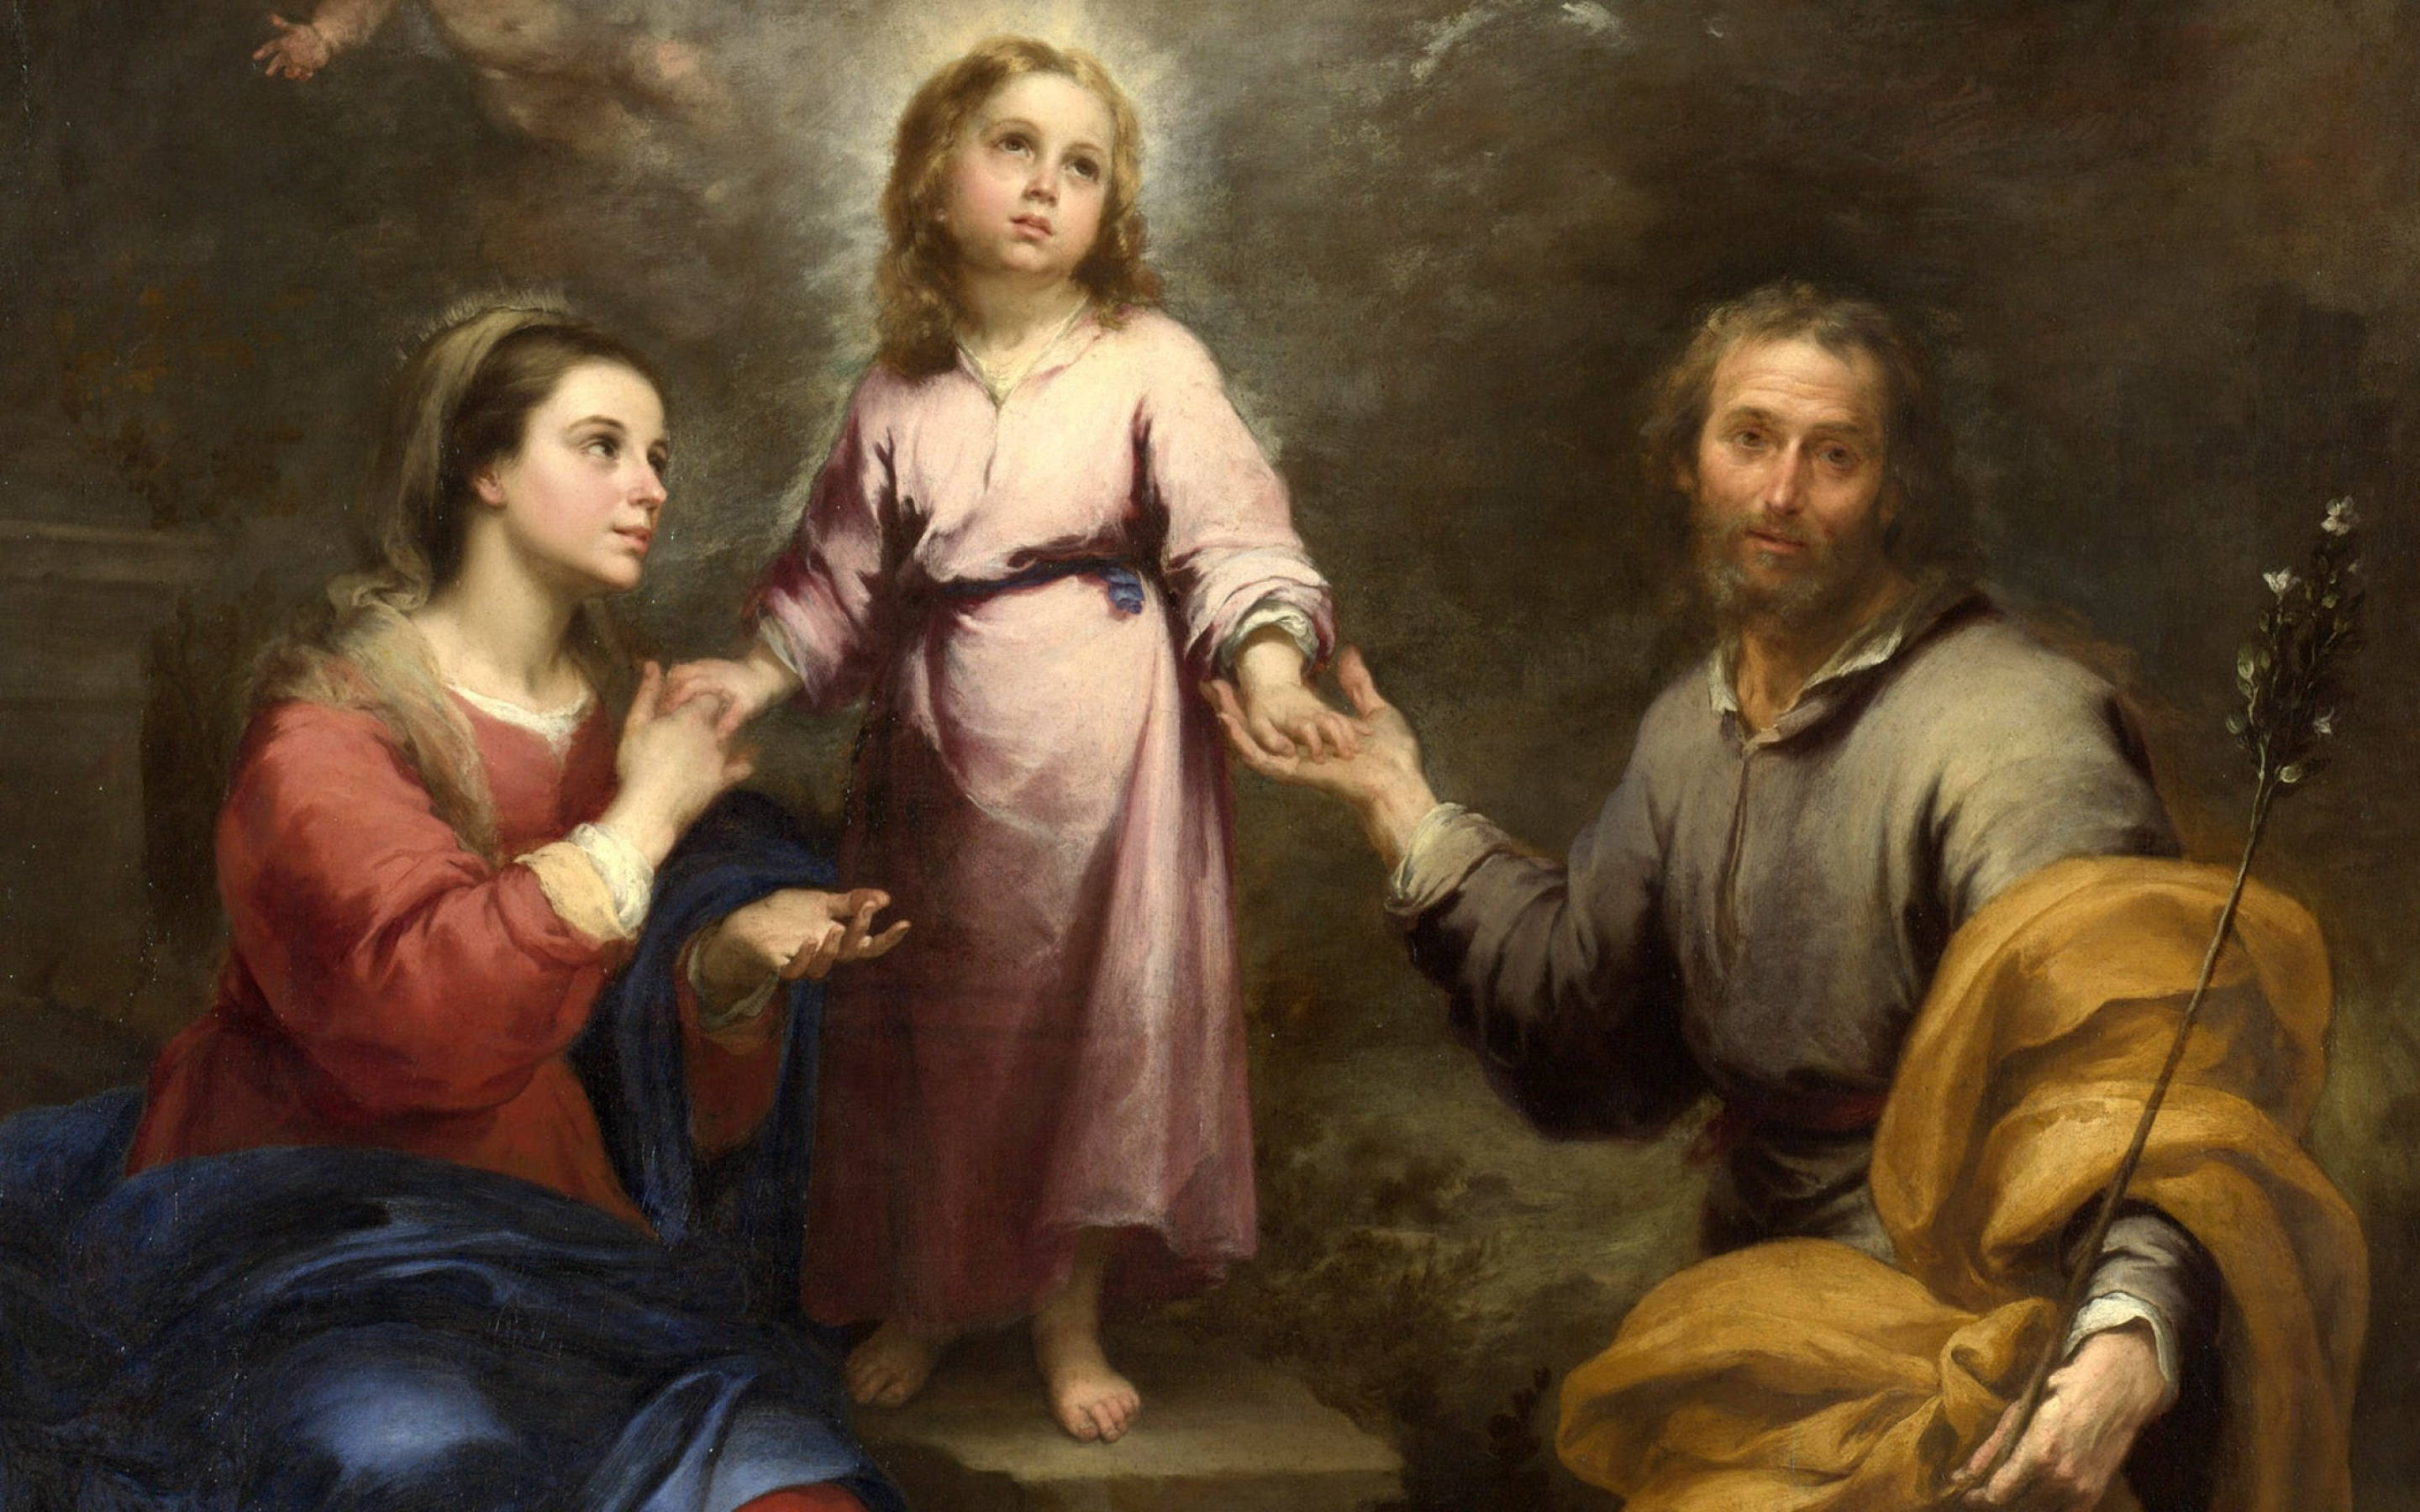 Painting Of The Holy Catholic Family Composed Of Jesus, Mary, And Joseph